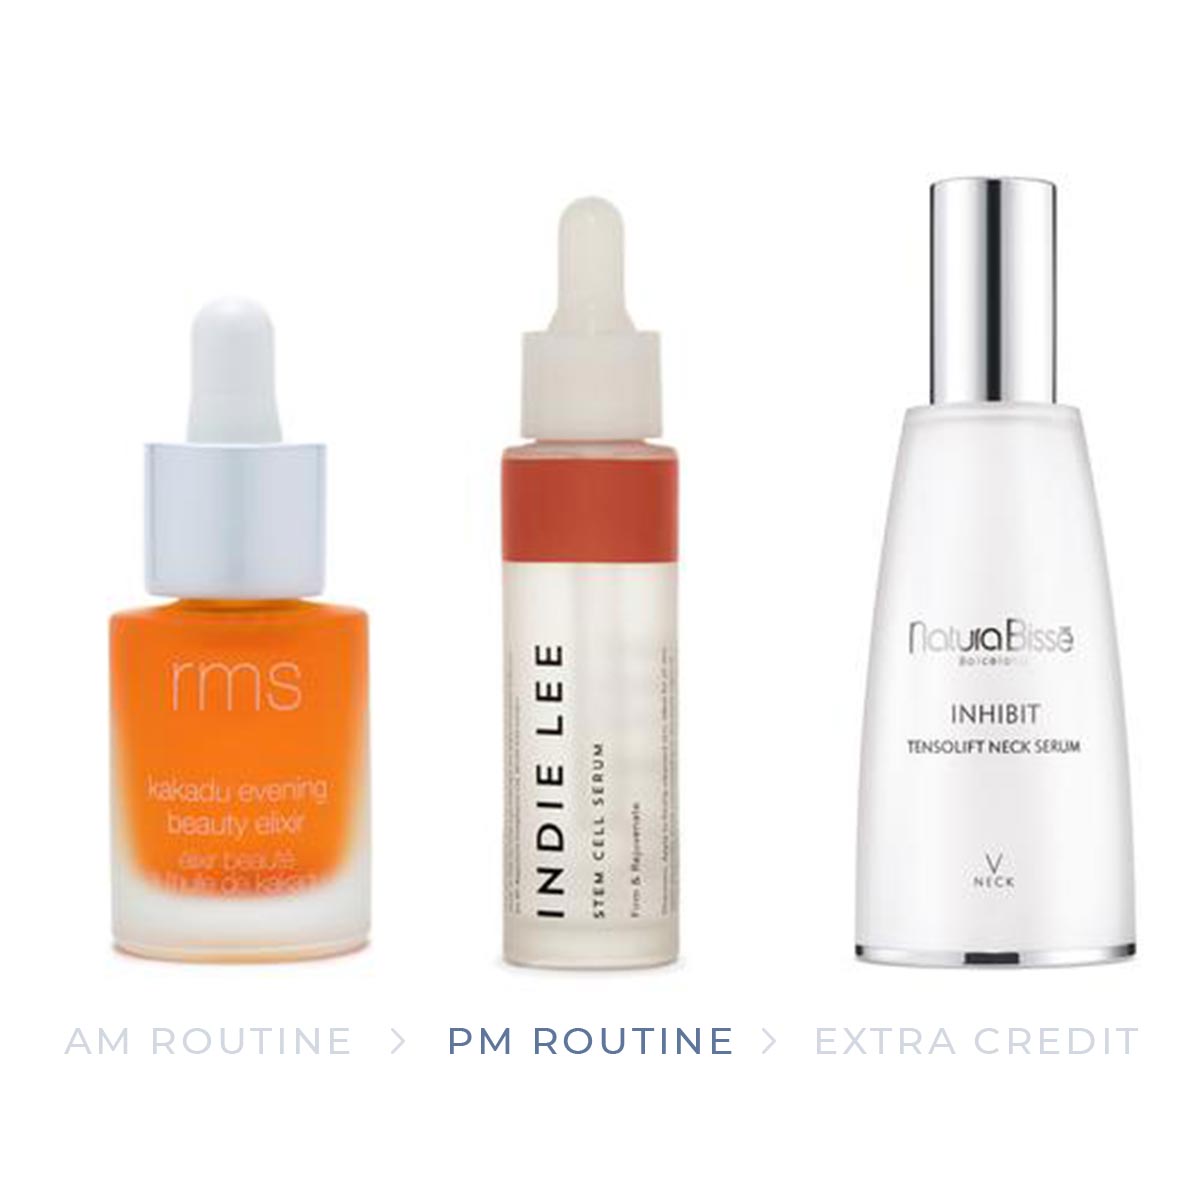 The products for the PM part of the normal skin skincare routine